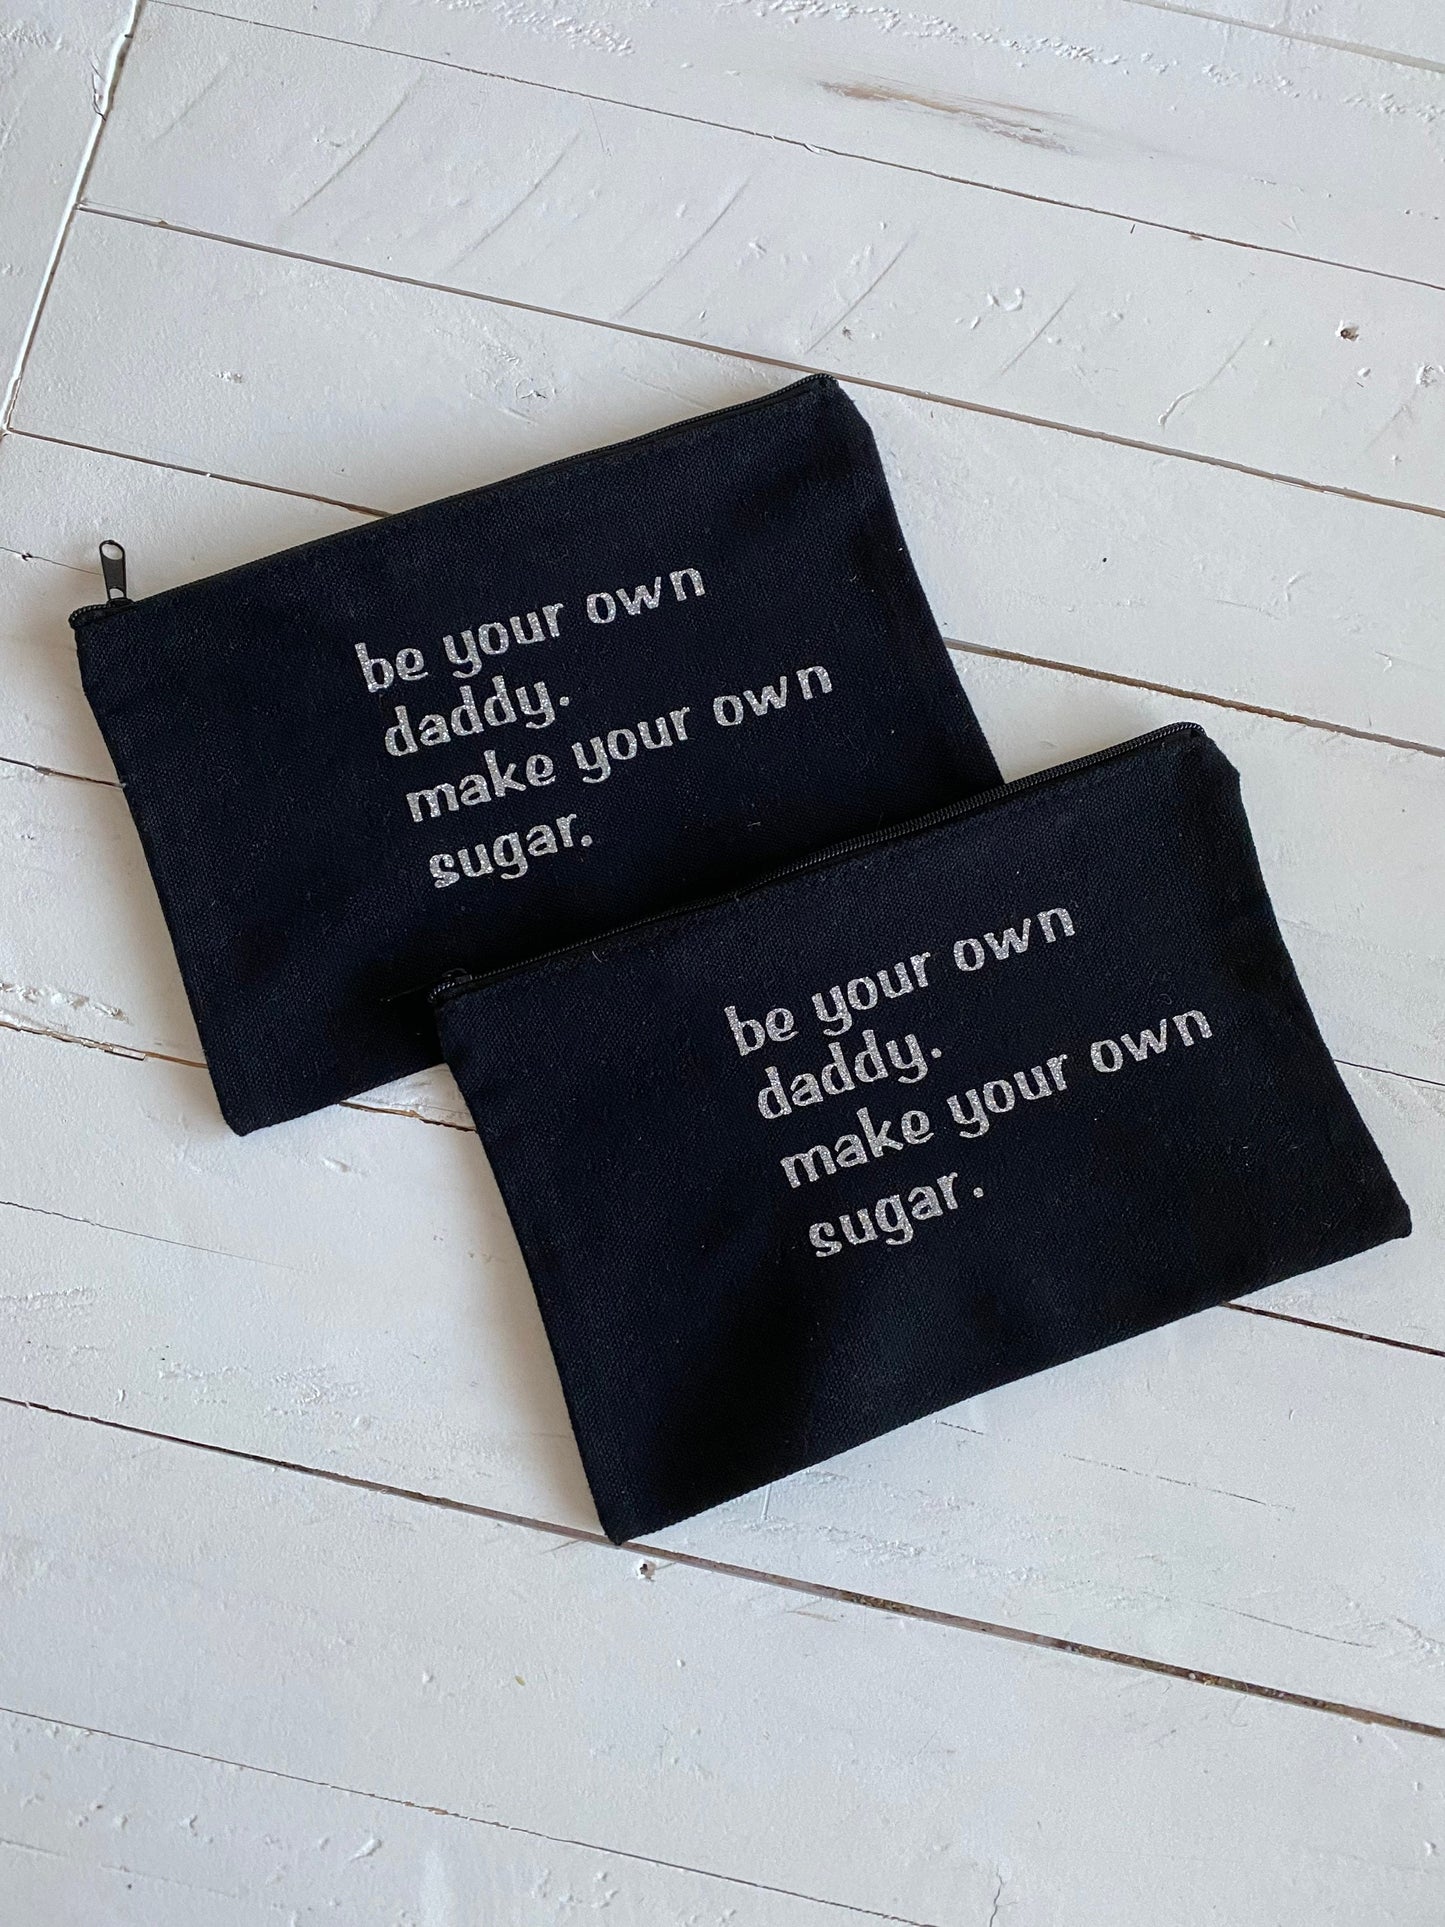 Be your own daddy, make your own sugar, Zipper Pouch